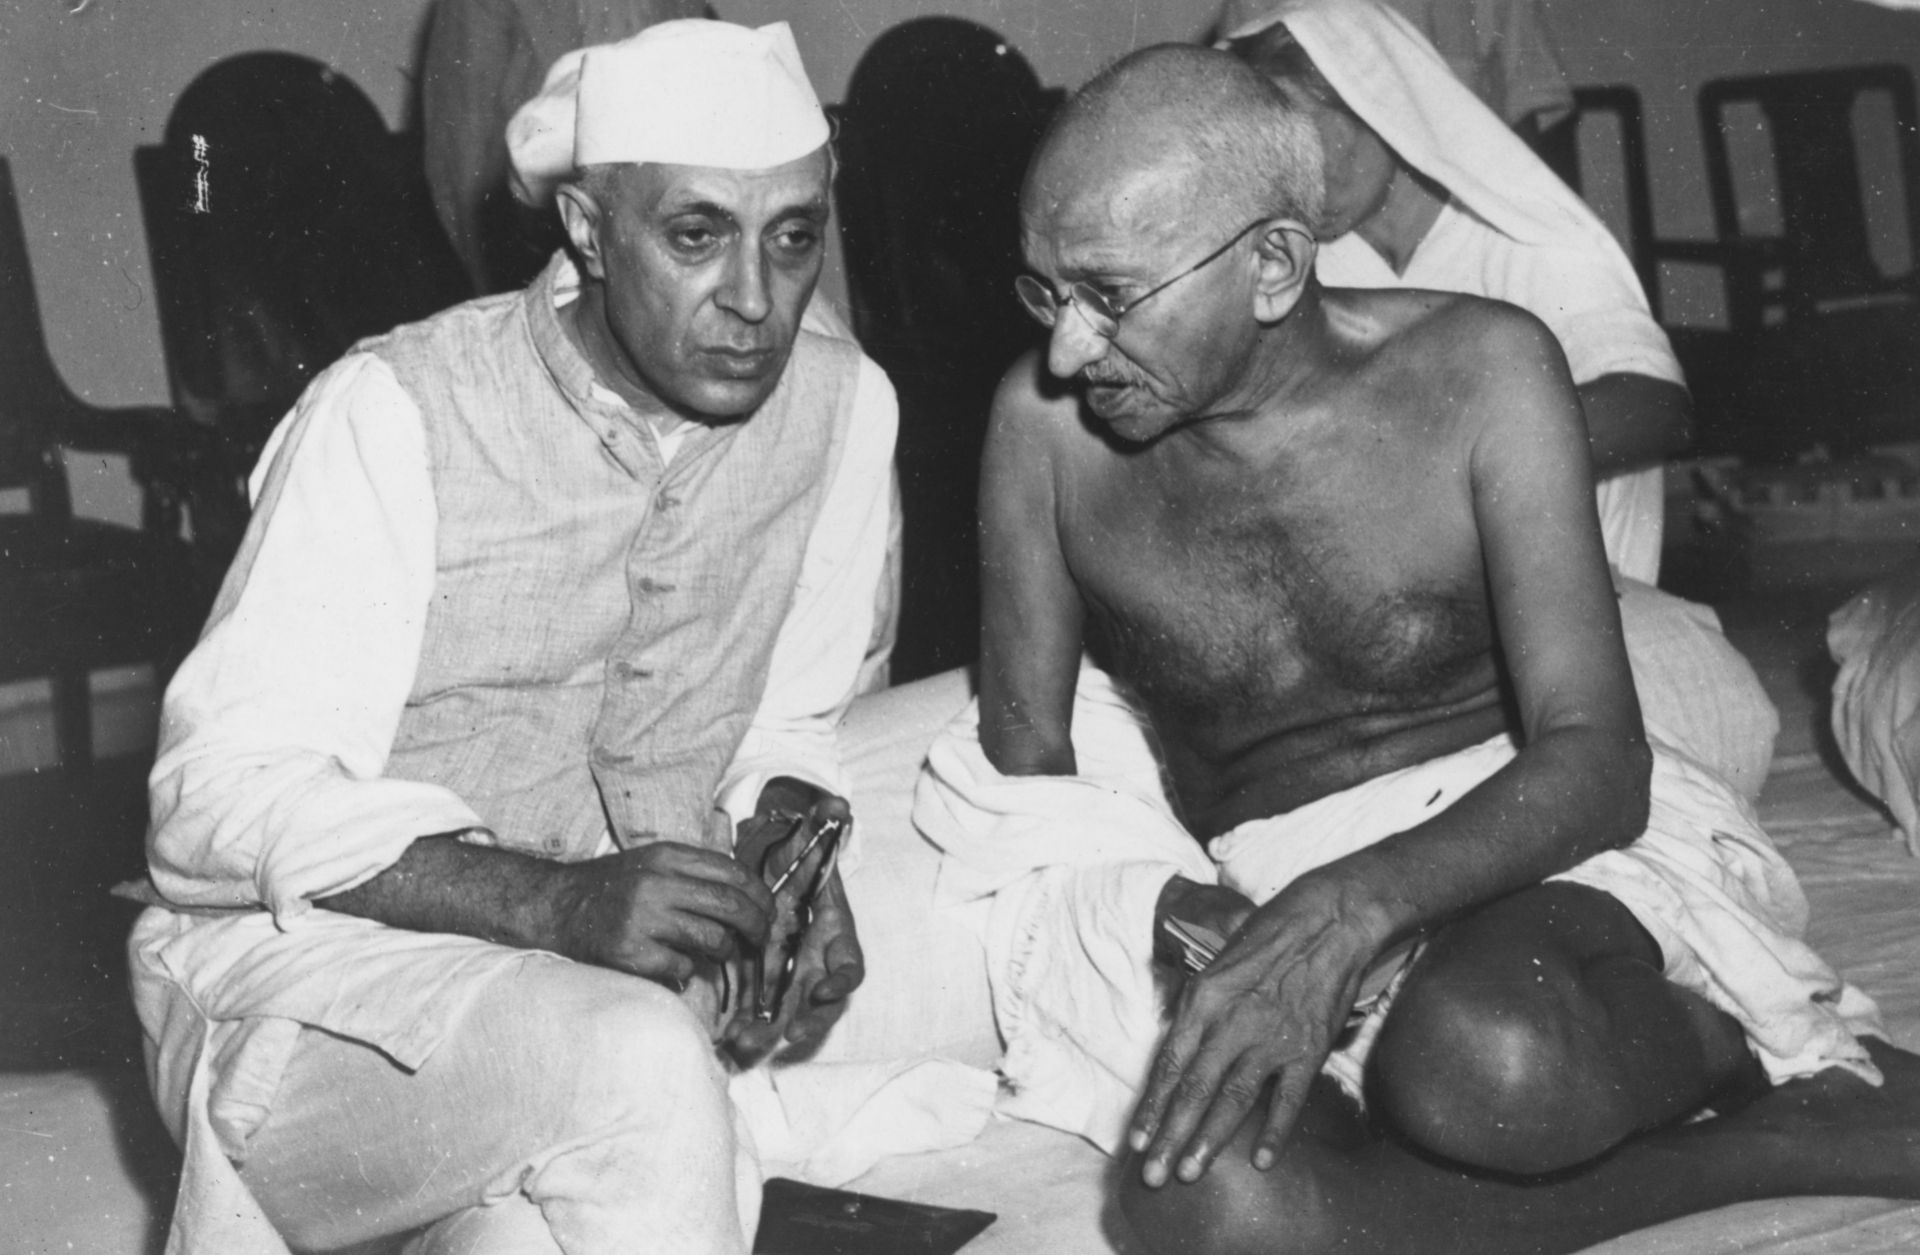 Jawaharlal Nehru (left) and Mohandas K. Gandhi talk at a committee meeting in Bombay.